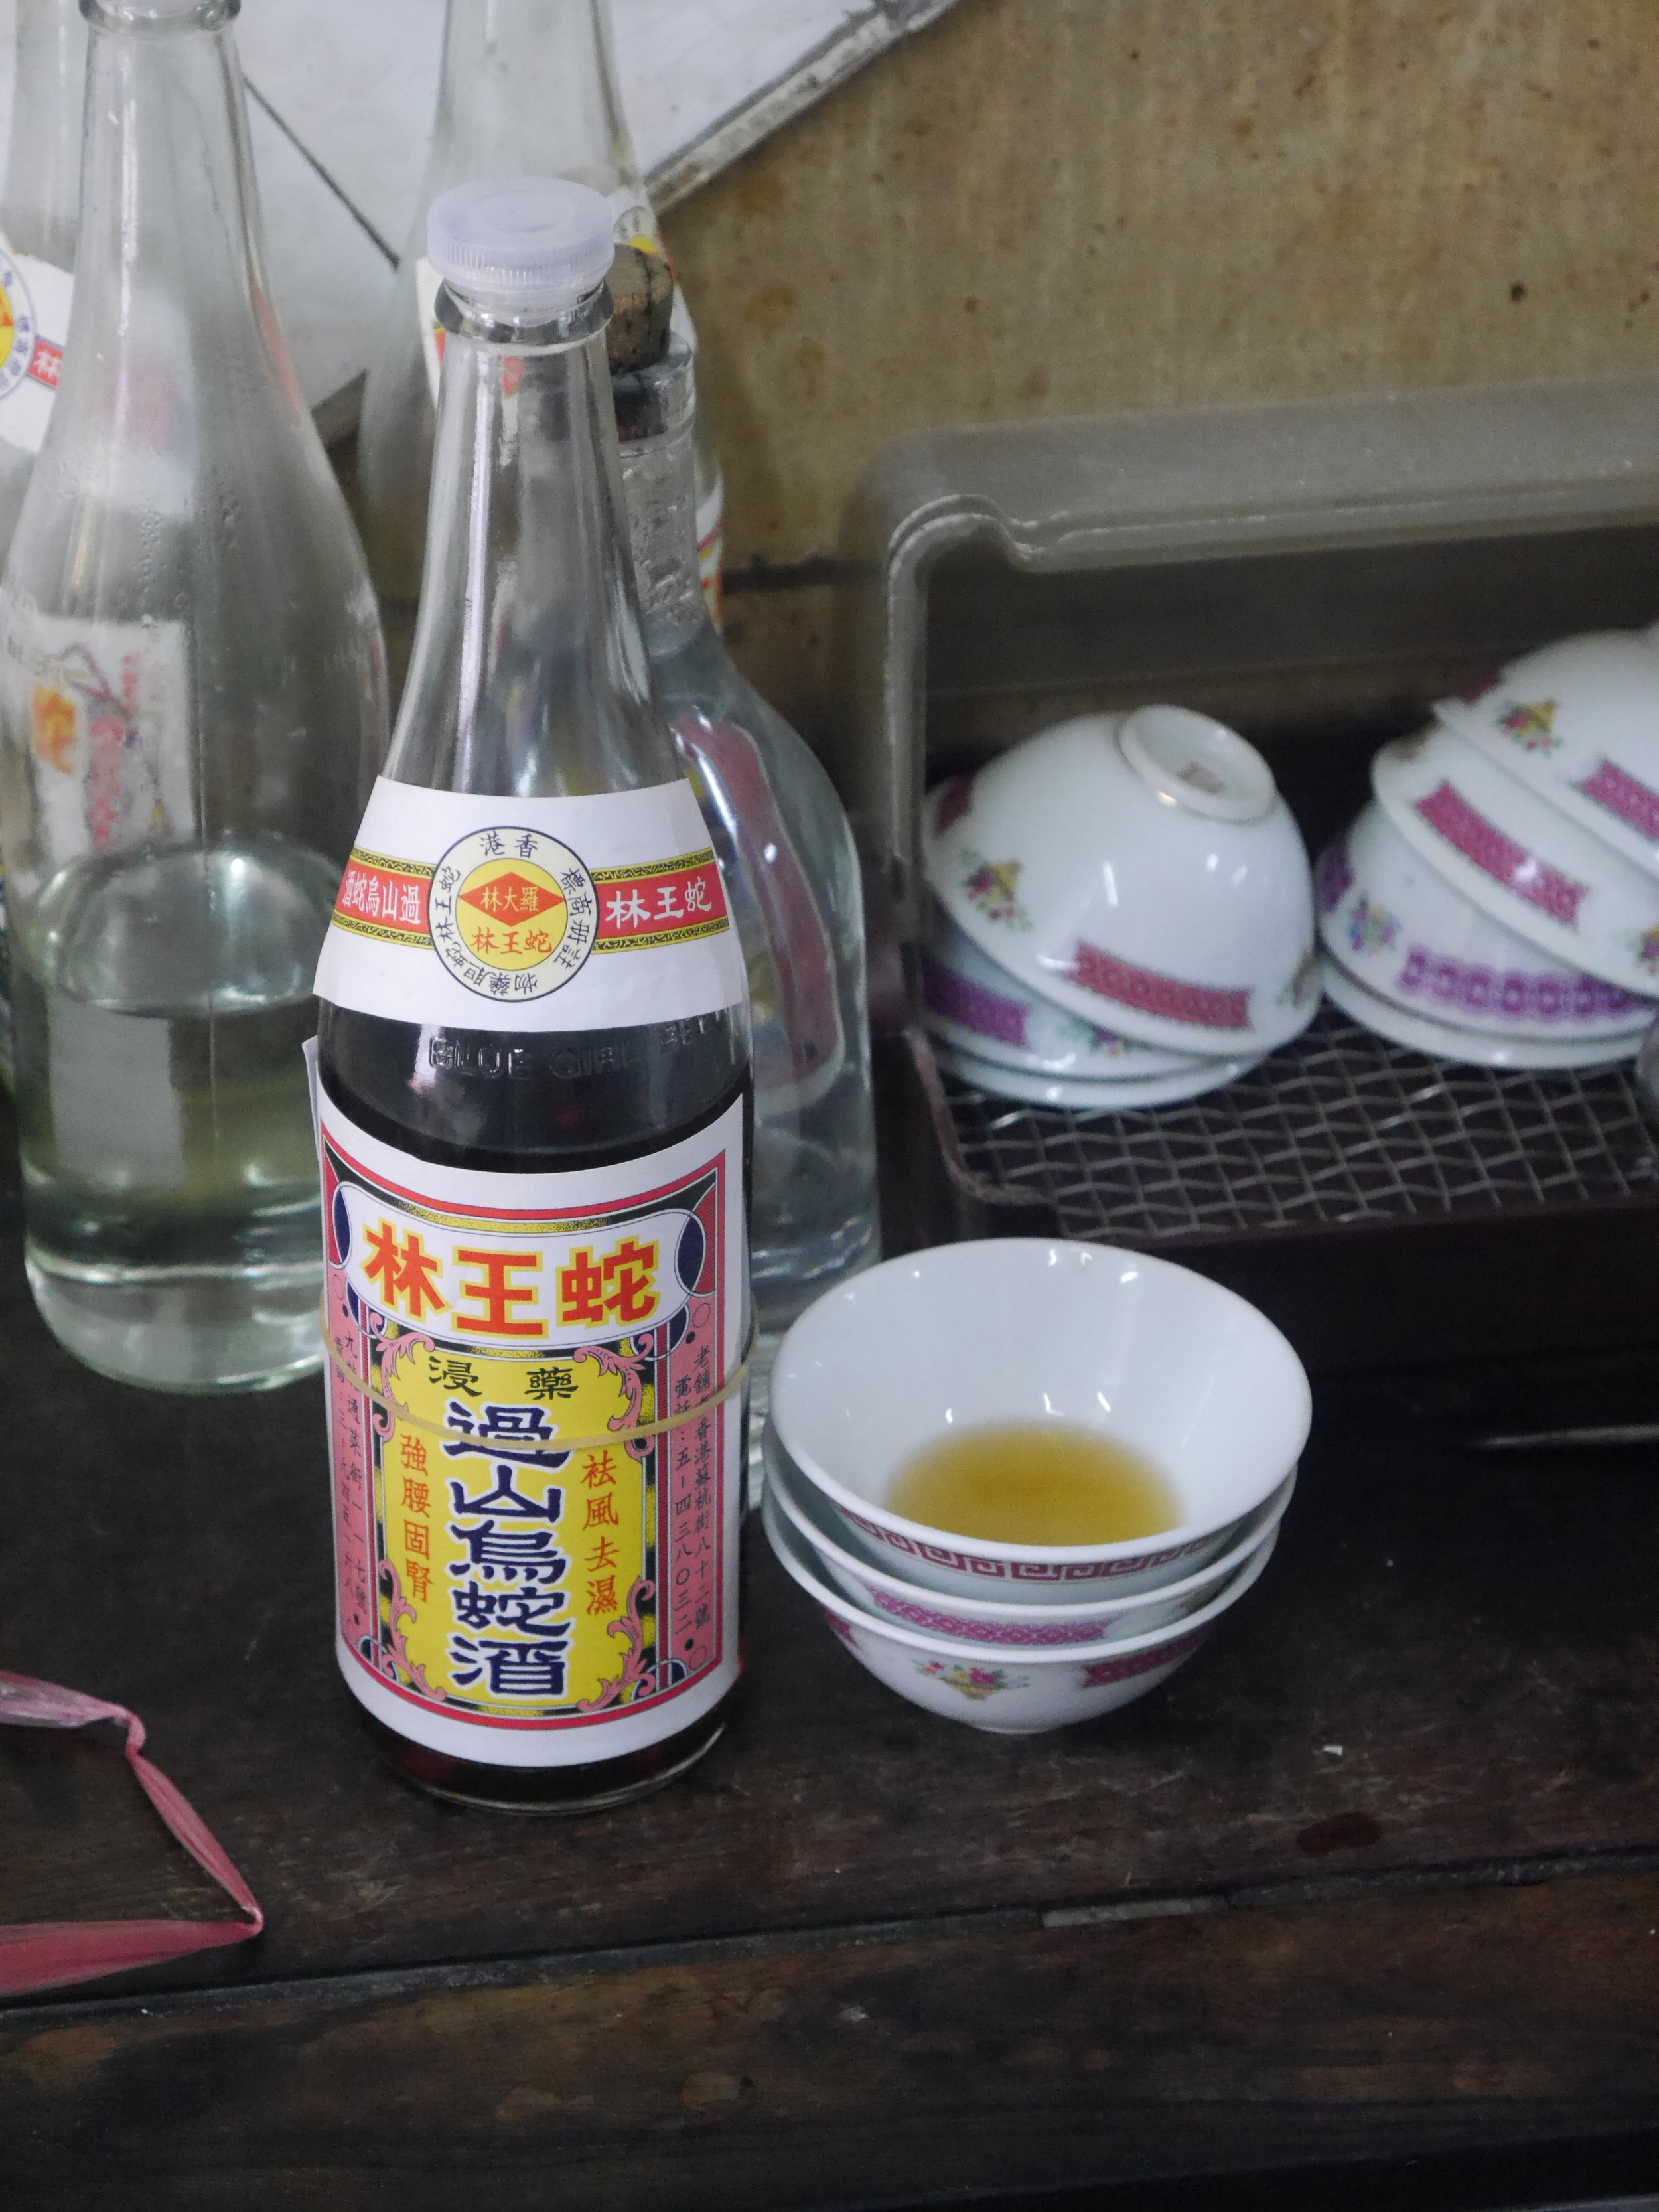  The snake wine we tried. 